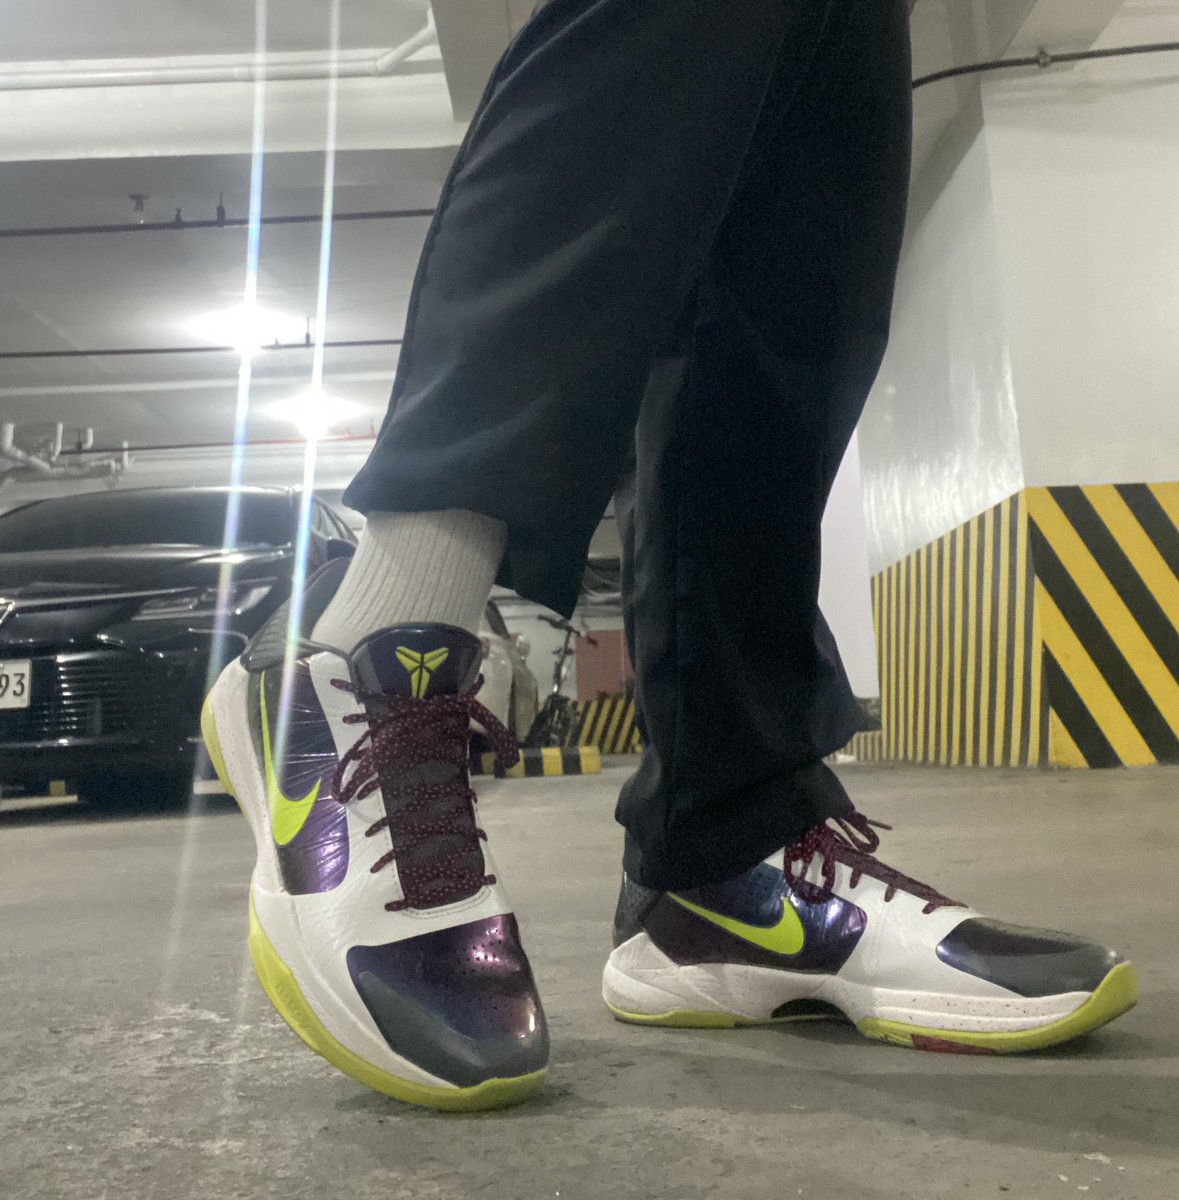 Always. Hot Handed. Cold Blooded. 🐍 #NikeBasketball #NikeZoomKobeVProtro #NikeZoomKobeV  #KobeV #KobeVProtro #Protro #Chaos #WearYourKicks #HatersGonnaHate #StaySaltyMFs #MambaStrikers #MambaForever